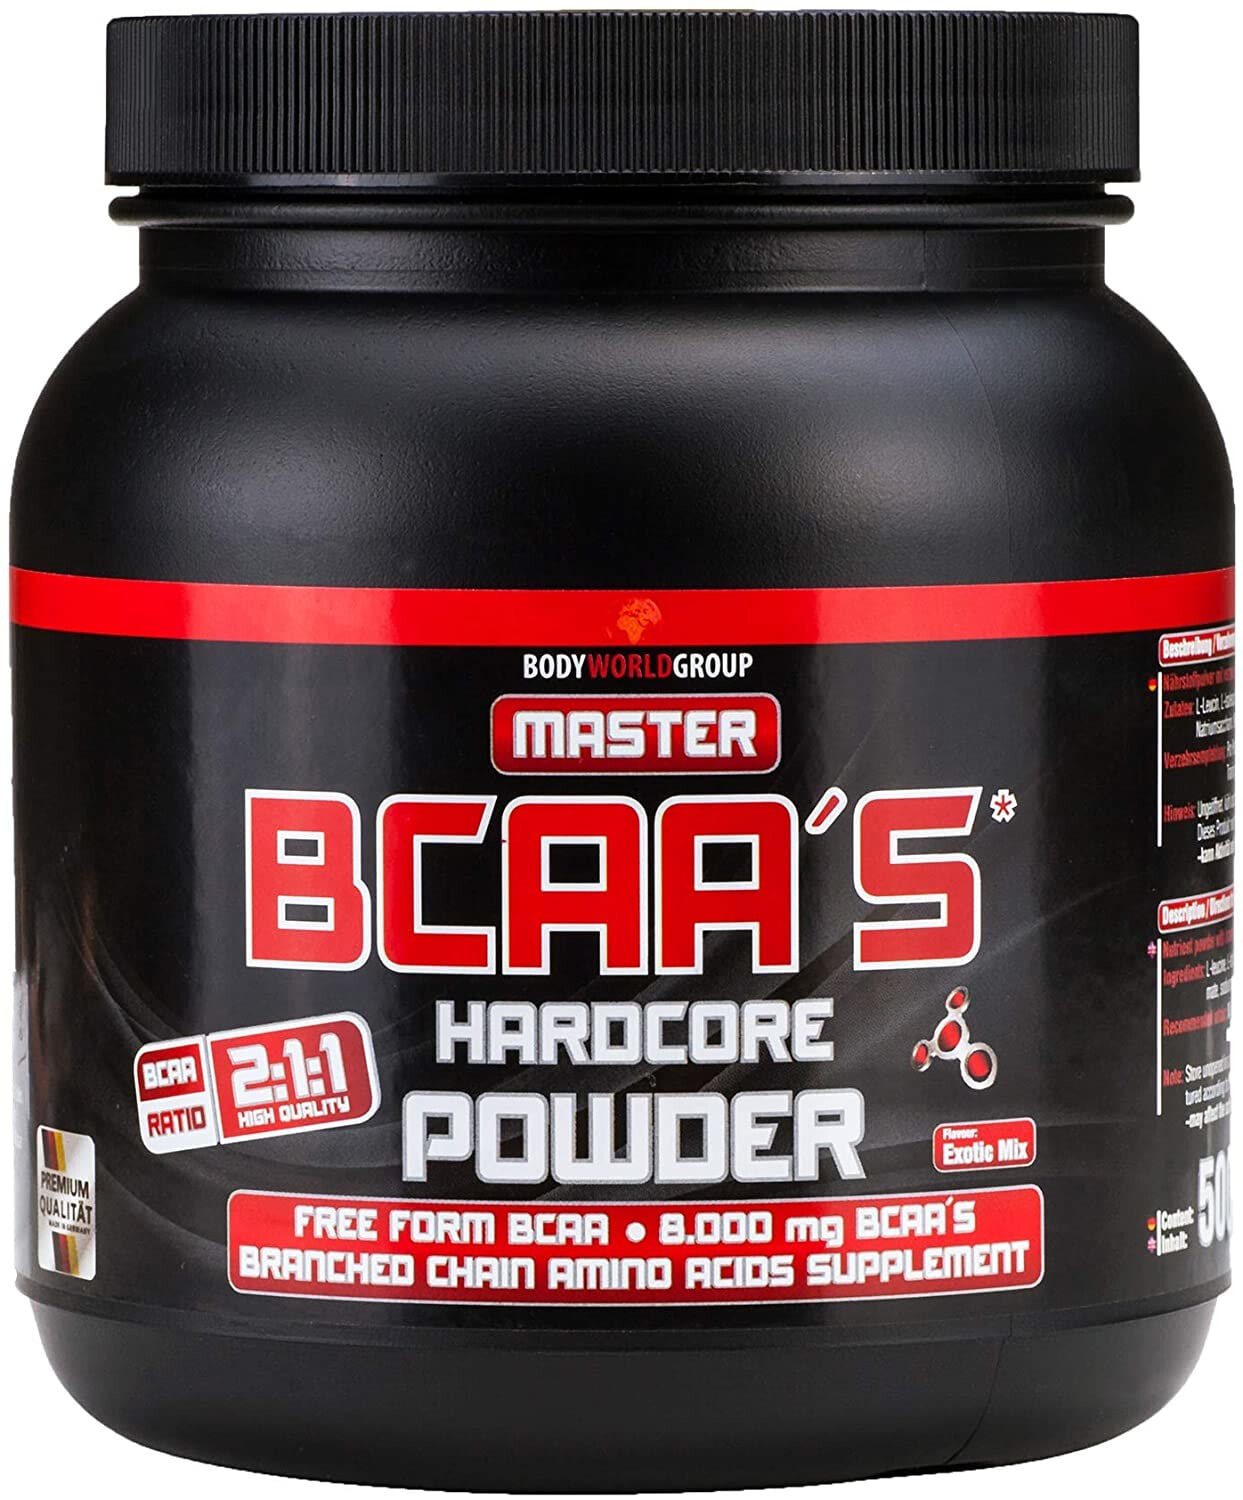 BWG Master BCAA Hardcore Powder Muscle Exotic Mix, Container with Measuring Spoon, 1 Pack (1 x 500 g)